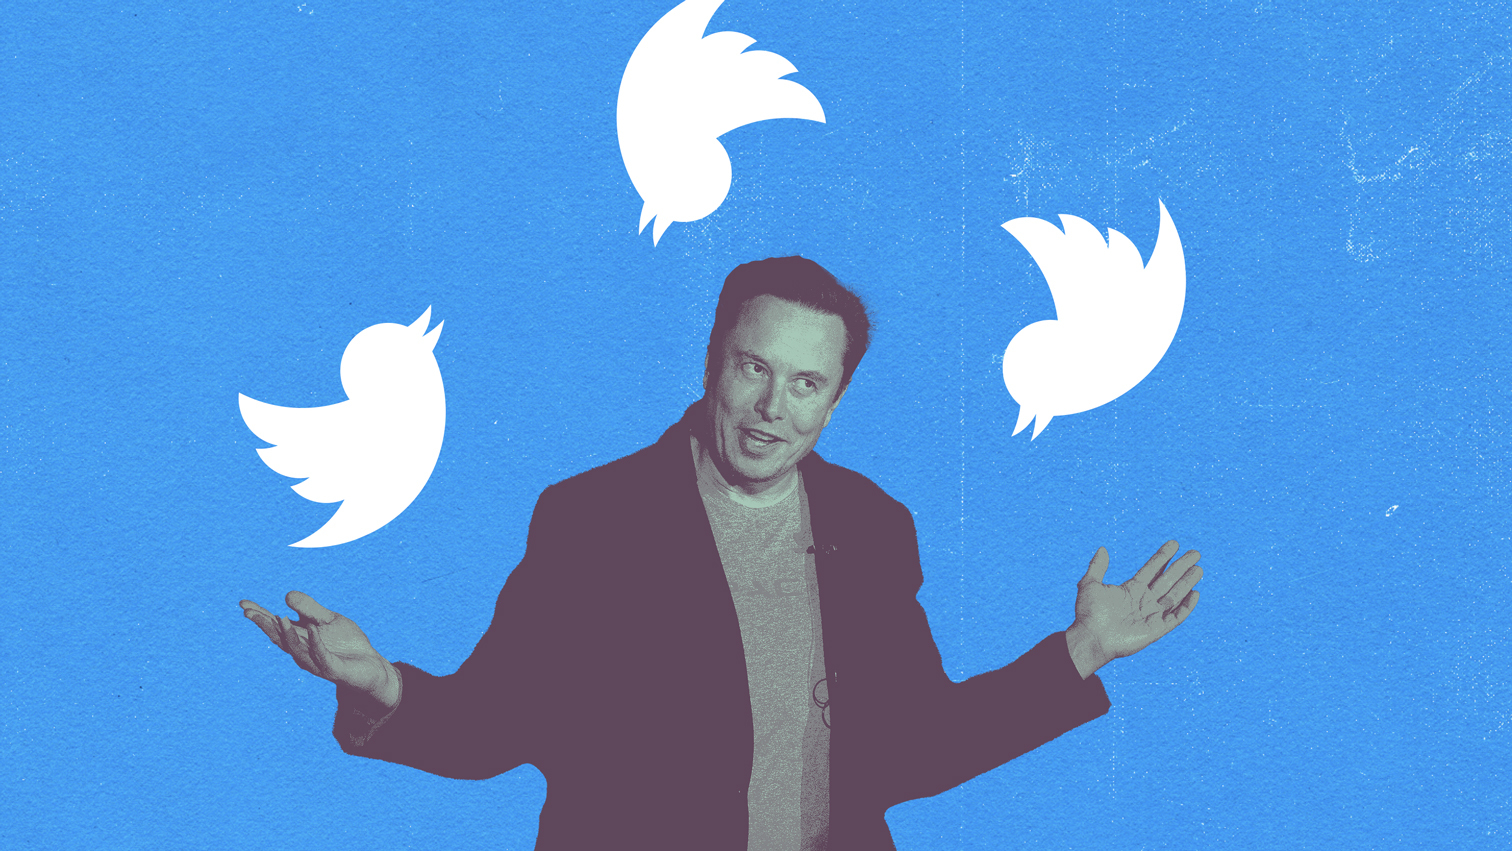 Twitter makes millions of dollars from 10 accounts that Elon Musk unblocked - Andrew Tate, Aаron Anglin and The Gateway Pundit are bringing the company money